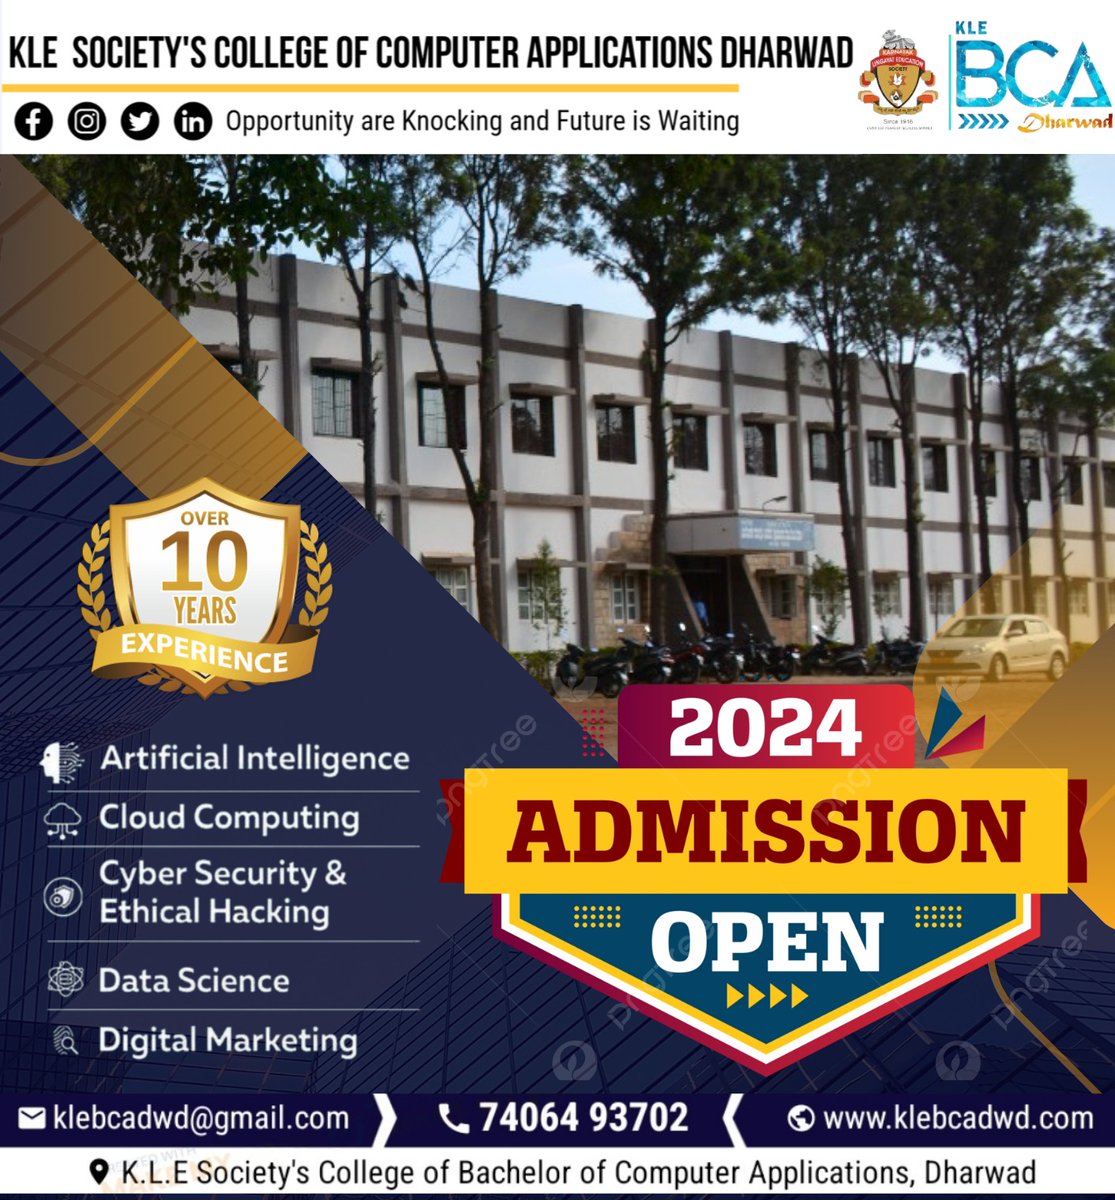 Step into excellence at KLE BCA Dharwad! Apply now for the 2024-25 intake. 🎓
#KLEBCADharwad #BCAAdmissions #TechnologyEducation #FutureReady #InnovateWithKLE #EmpowermentThroughEducation #DreamBig #CareerGoals #SuccessStories #BrightFuture